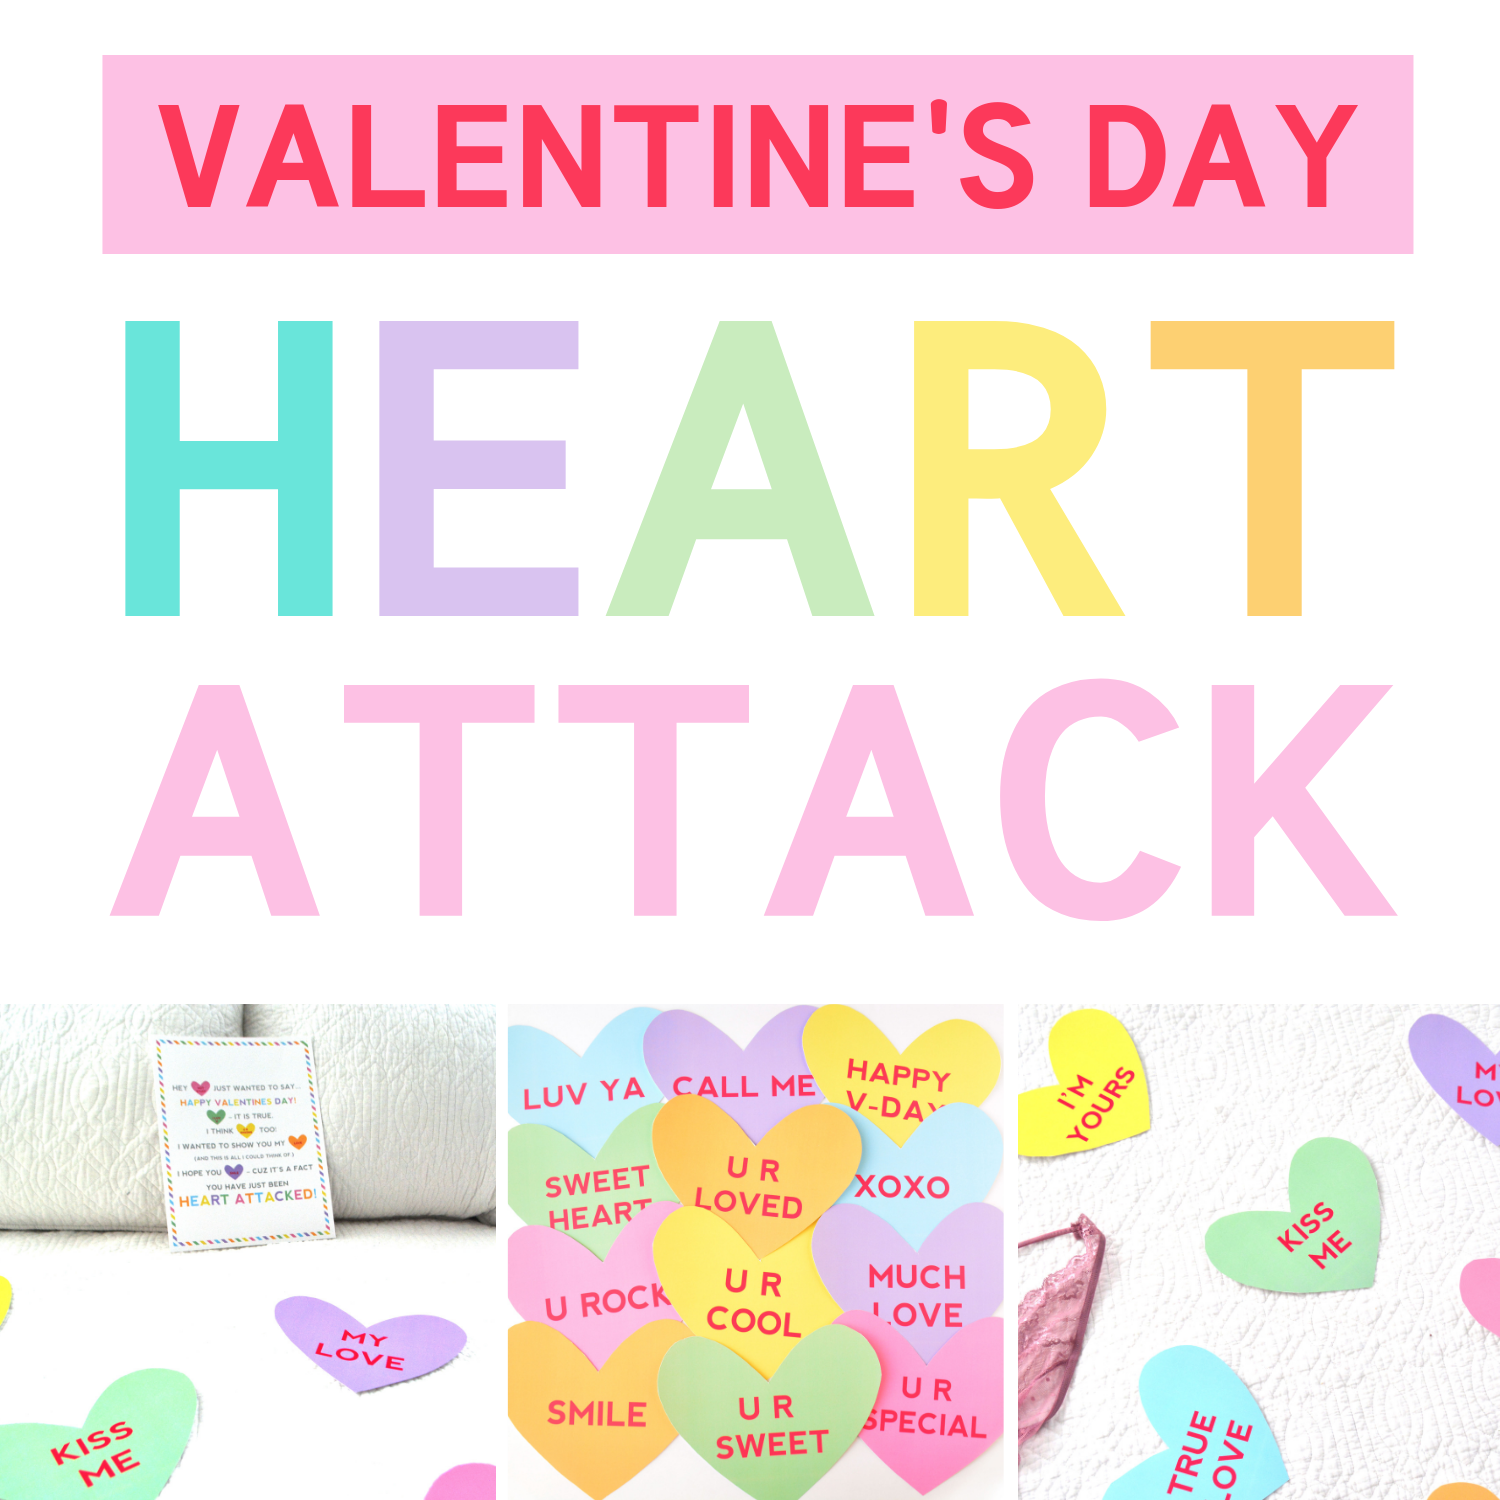 Valentine's Day Heart Attack Lawn Signs - From The Dating Divas1500 x 1500